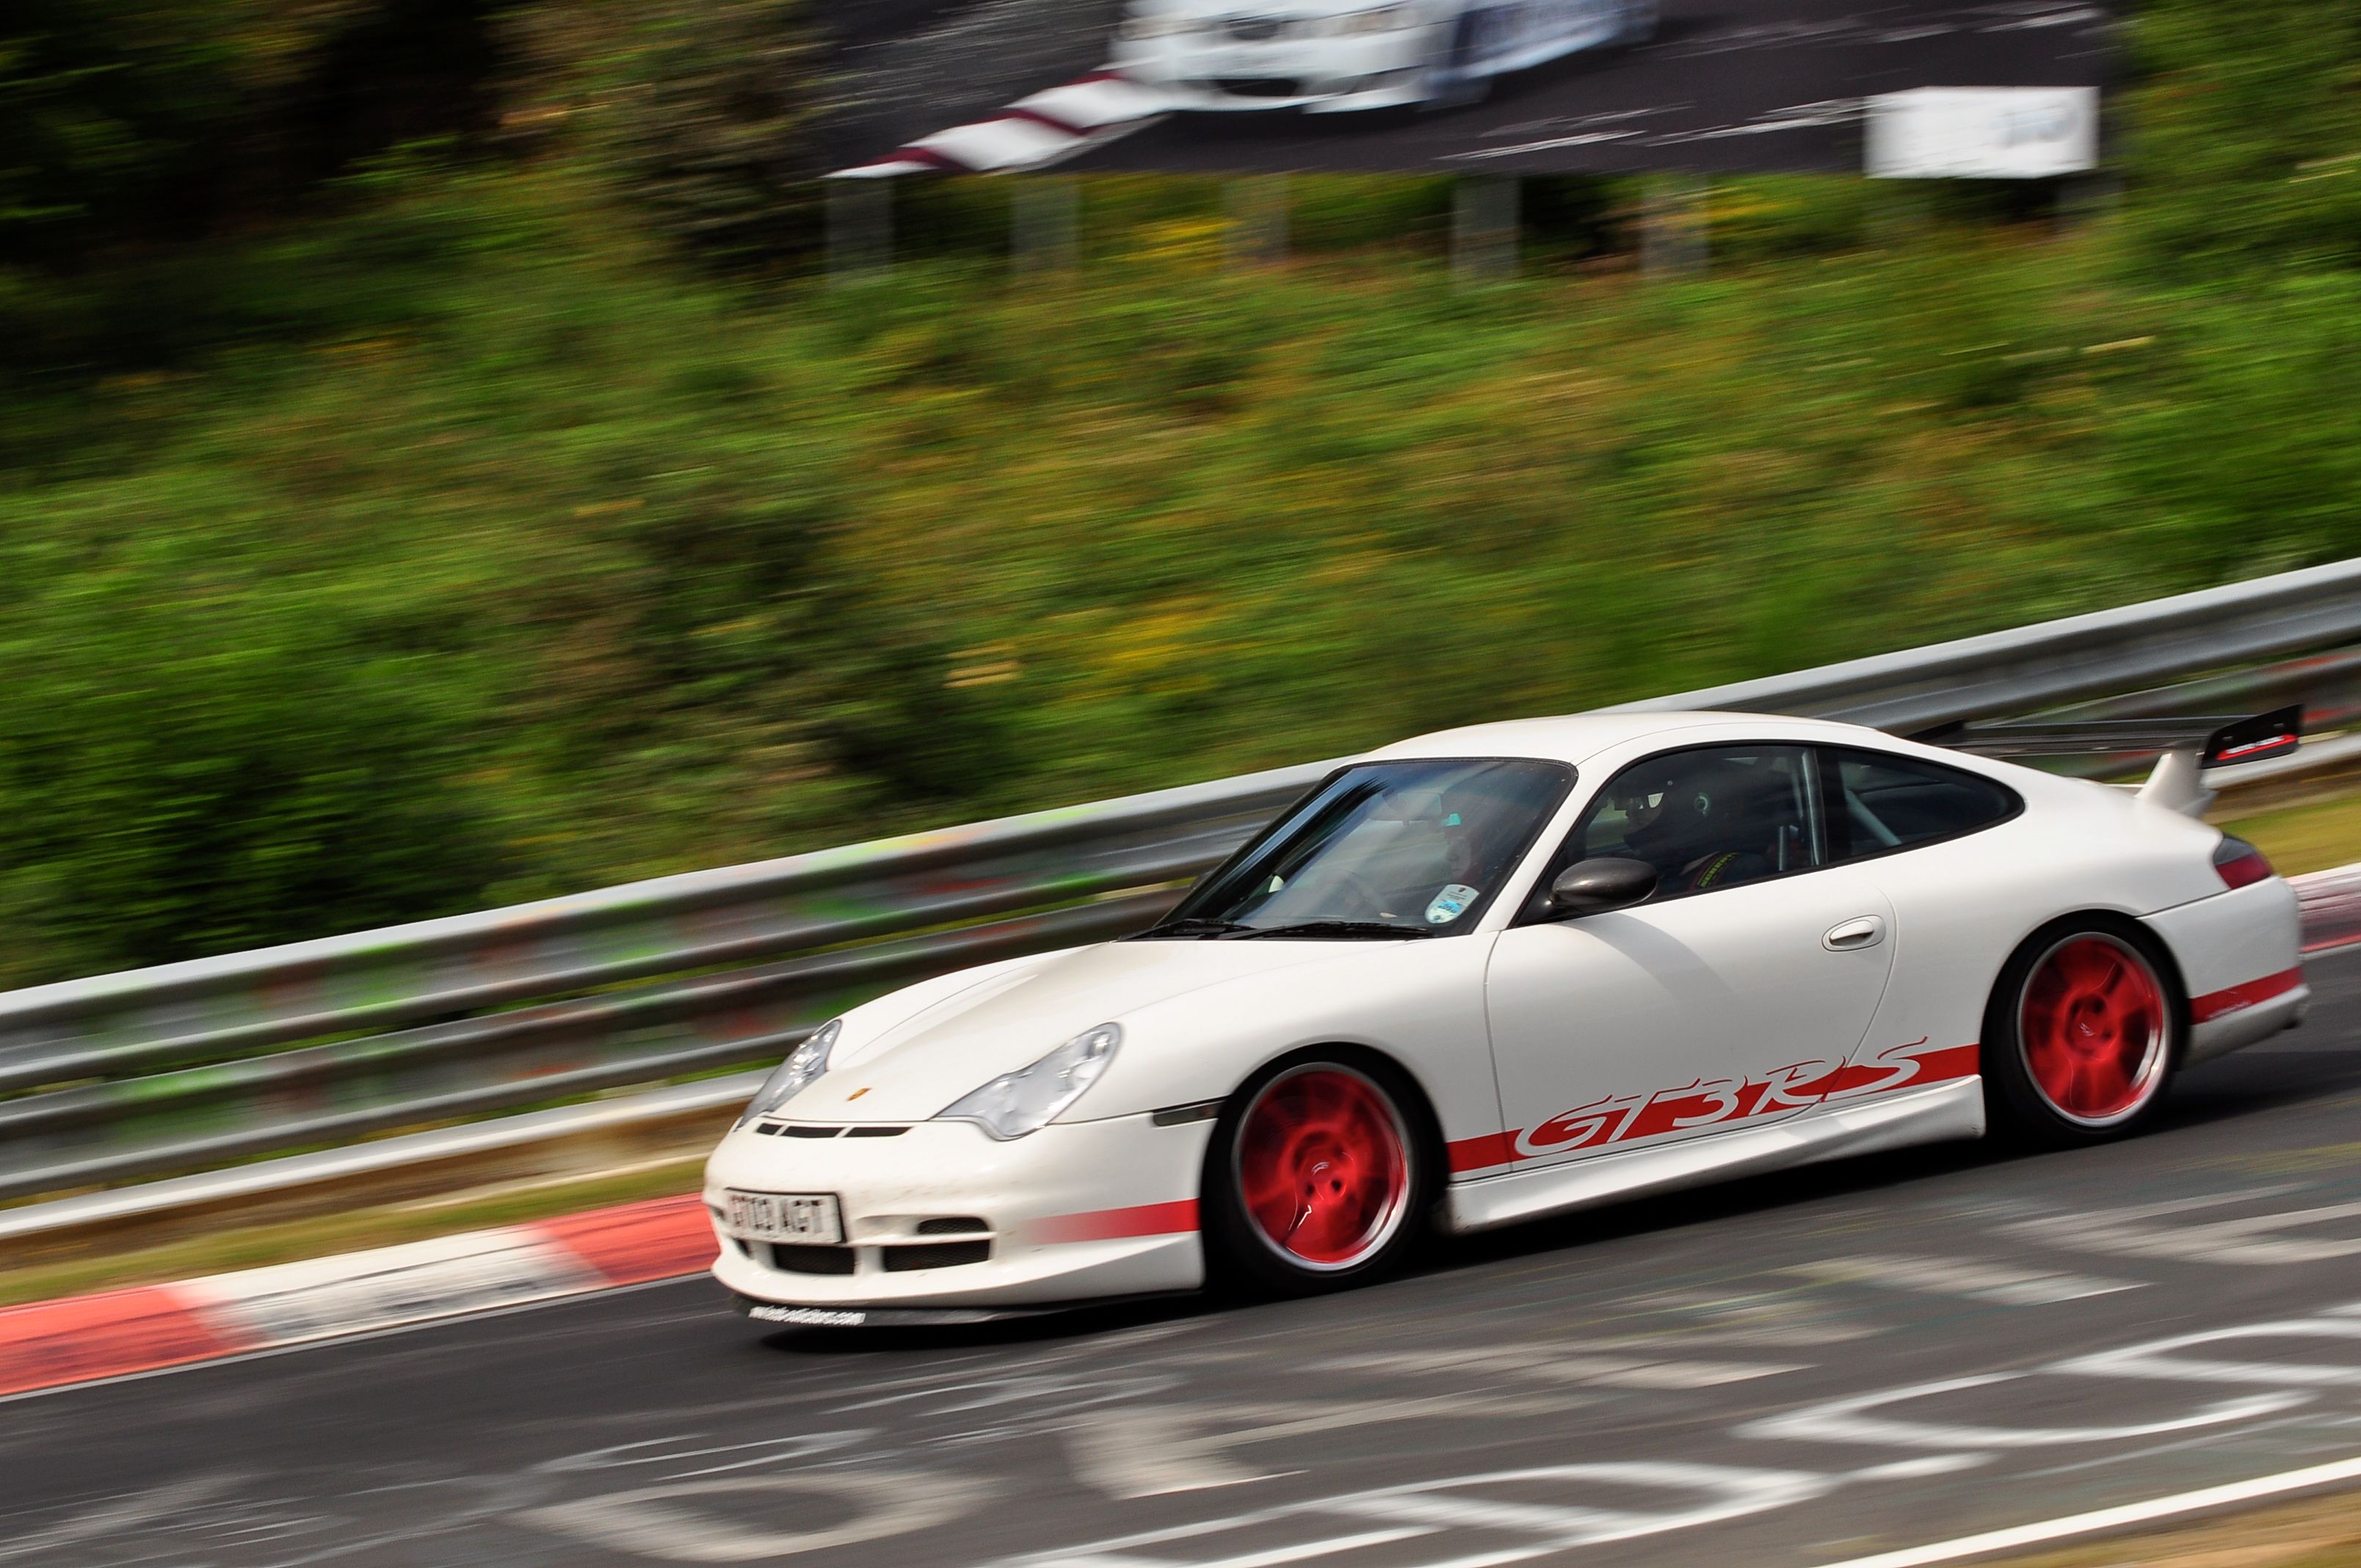 Porsche 996 GT3 RS on the track